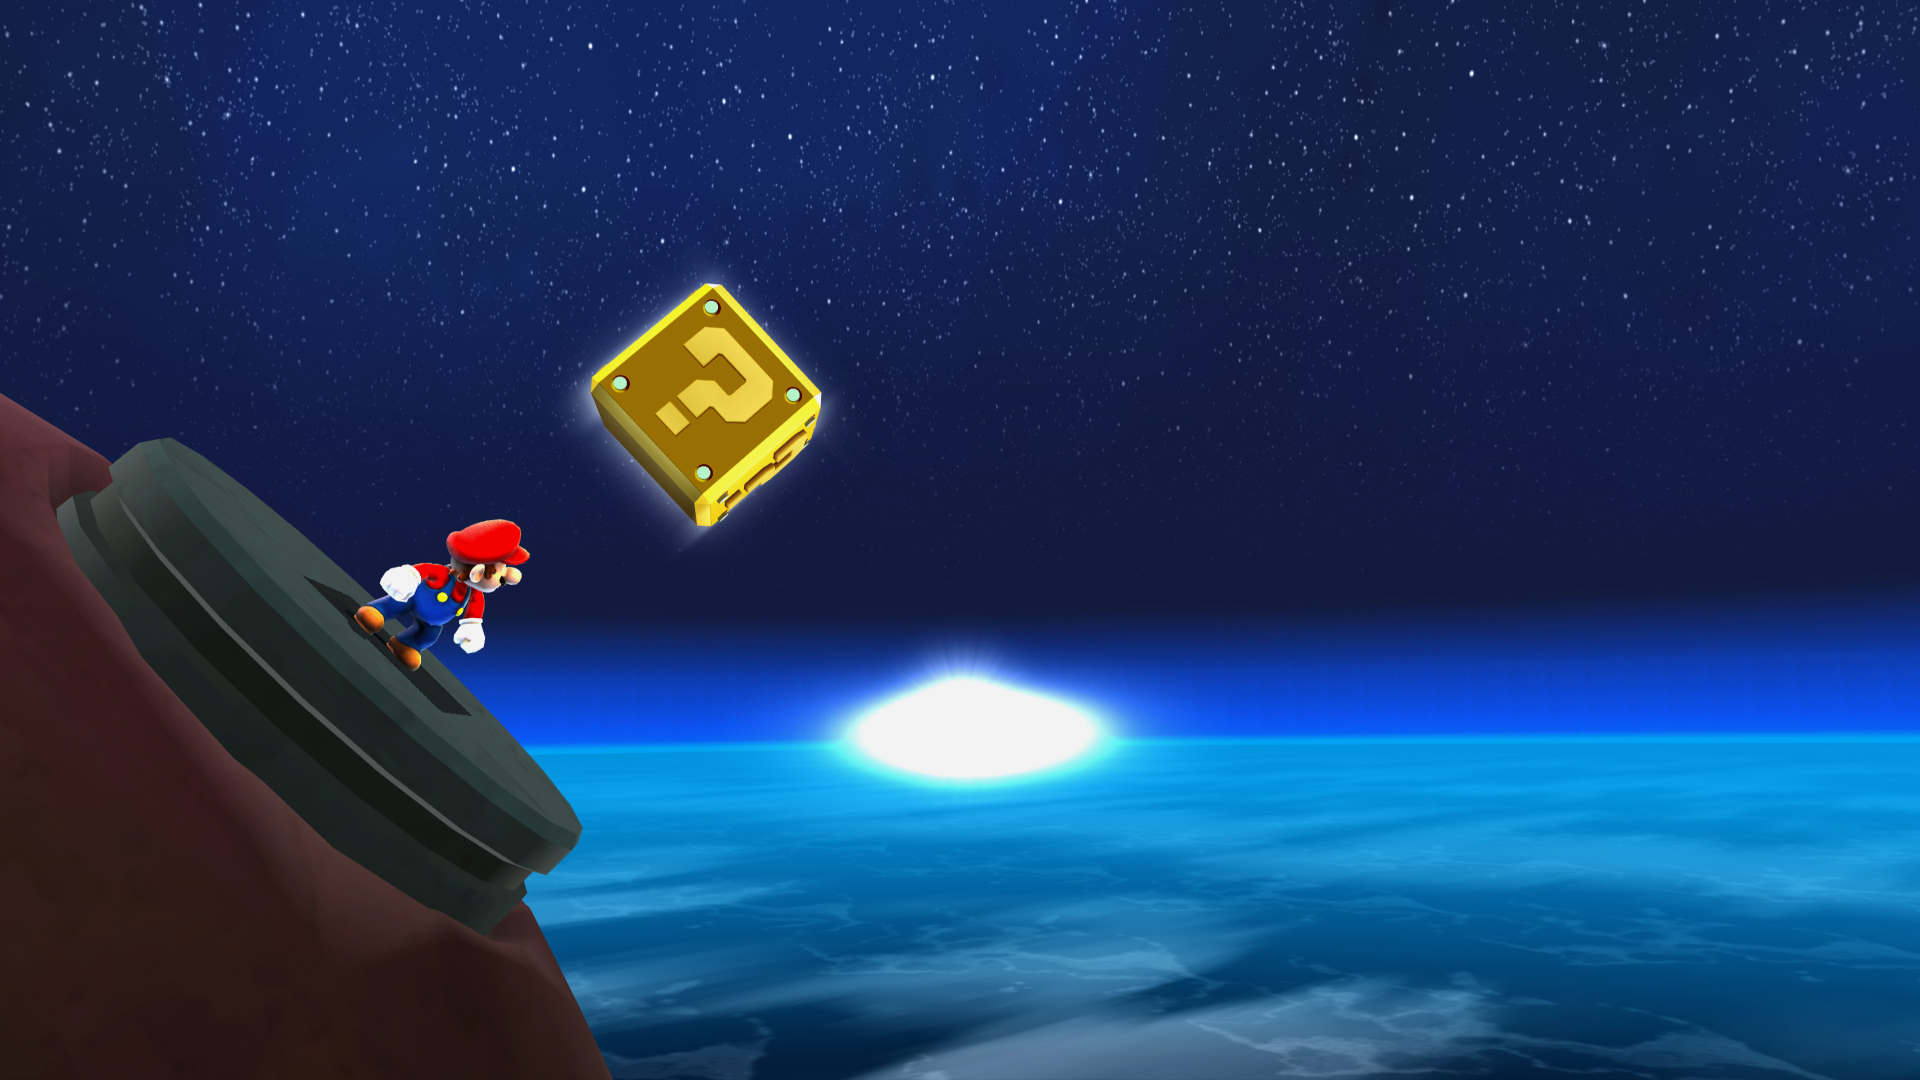 24 Super Mario Galaxy HD Wallpapers | Backgrounds - Wallpaper Abyss